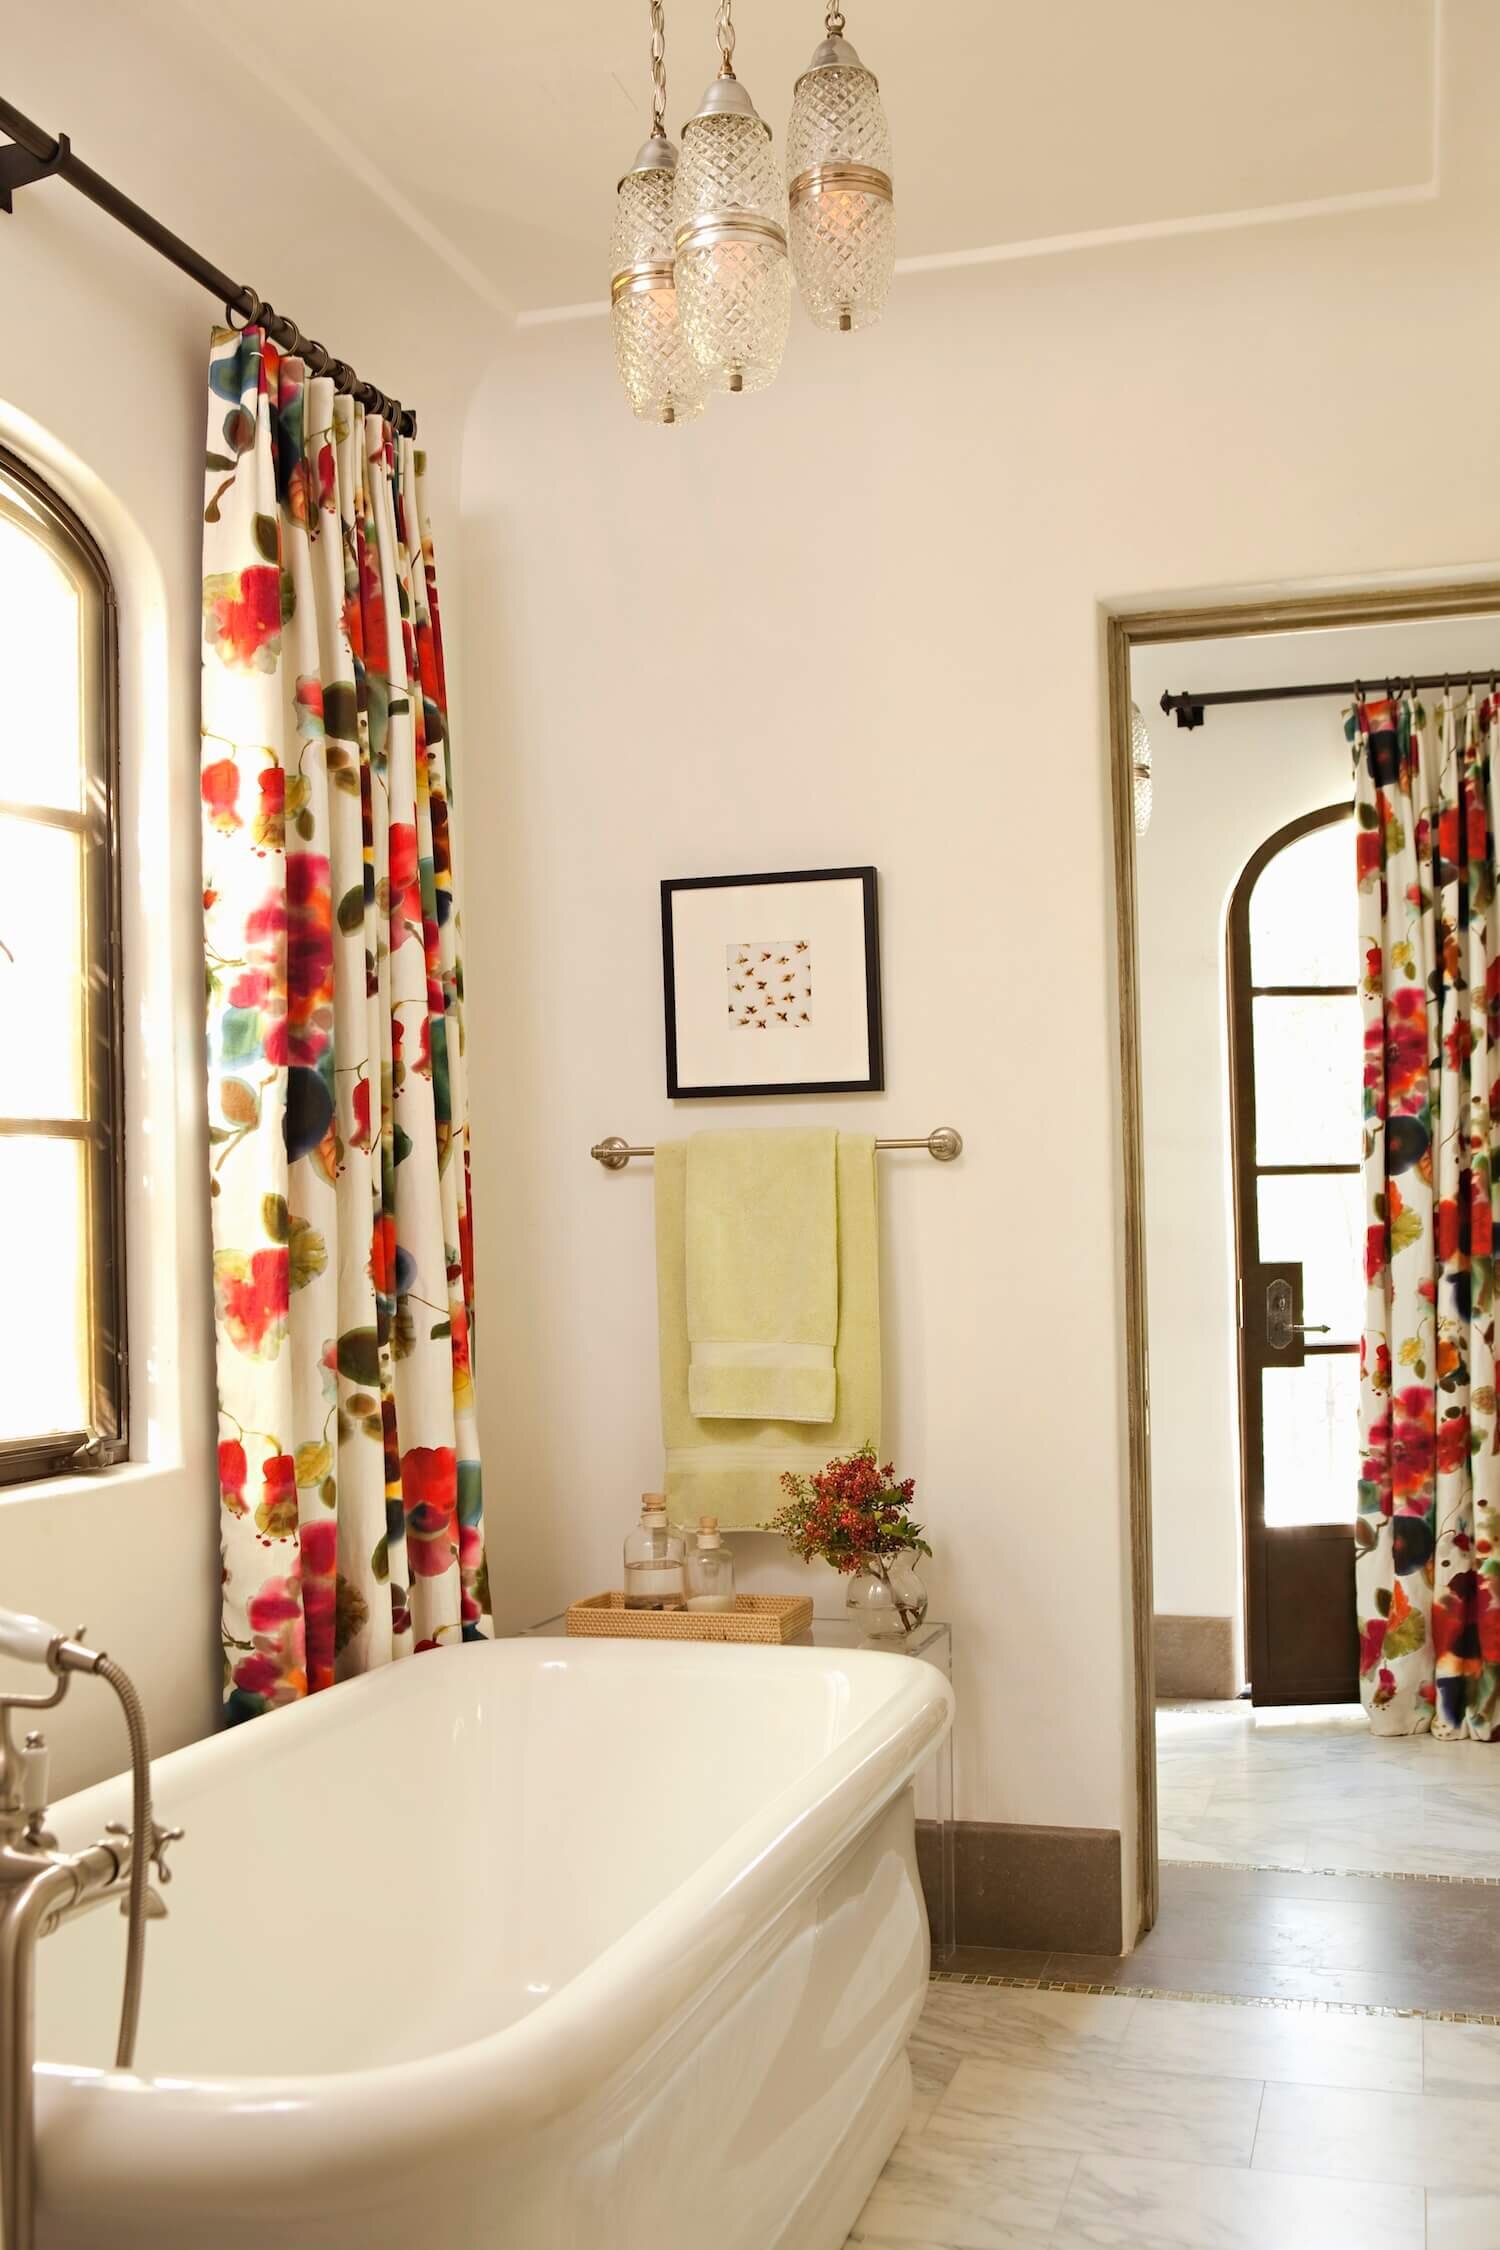 Bathroom with stand alone tub and floral custom drapery